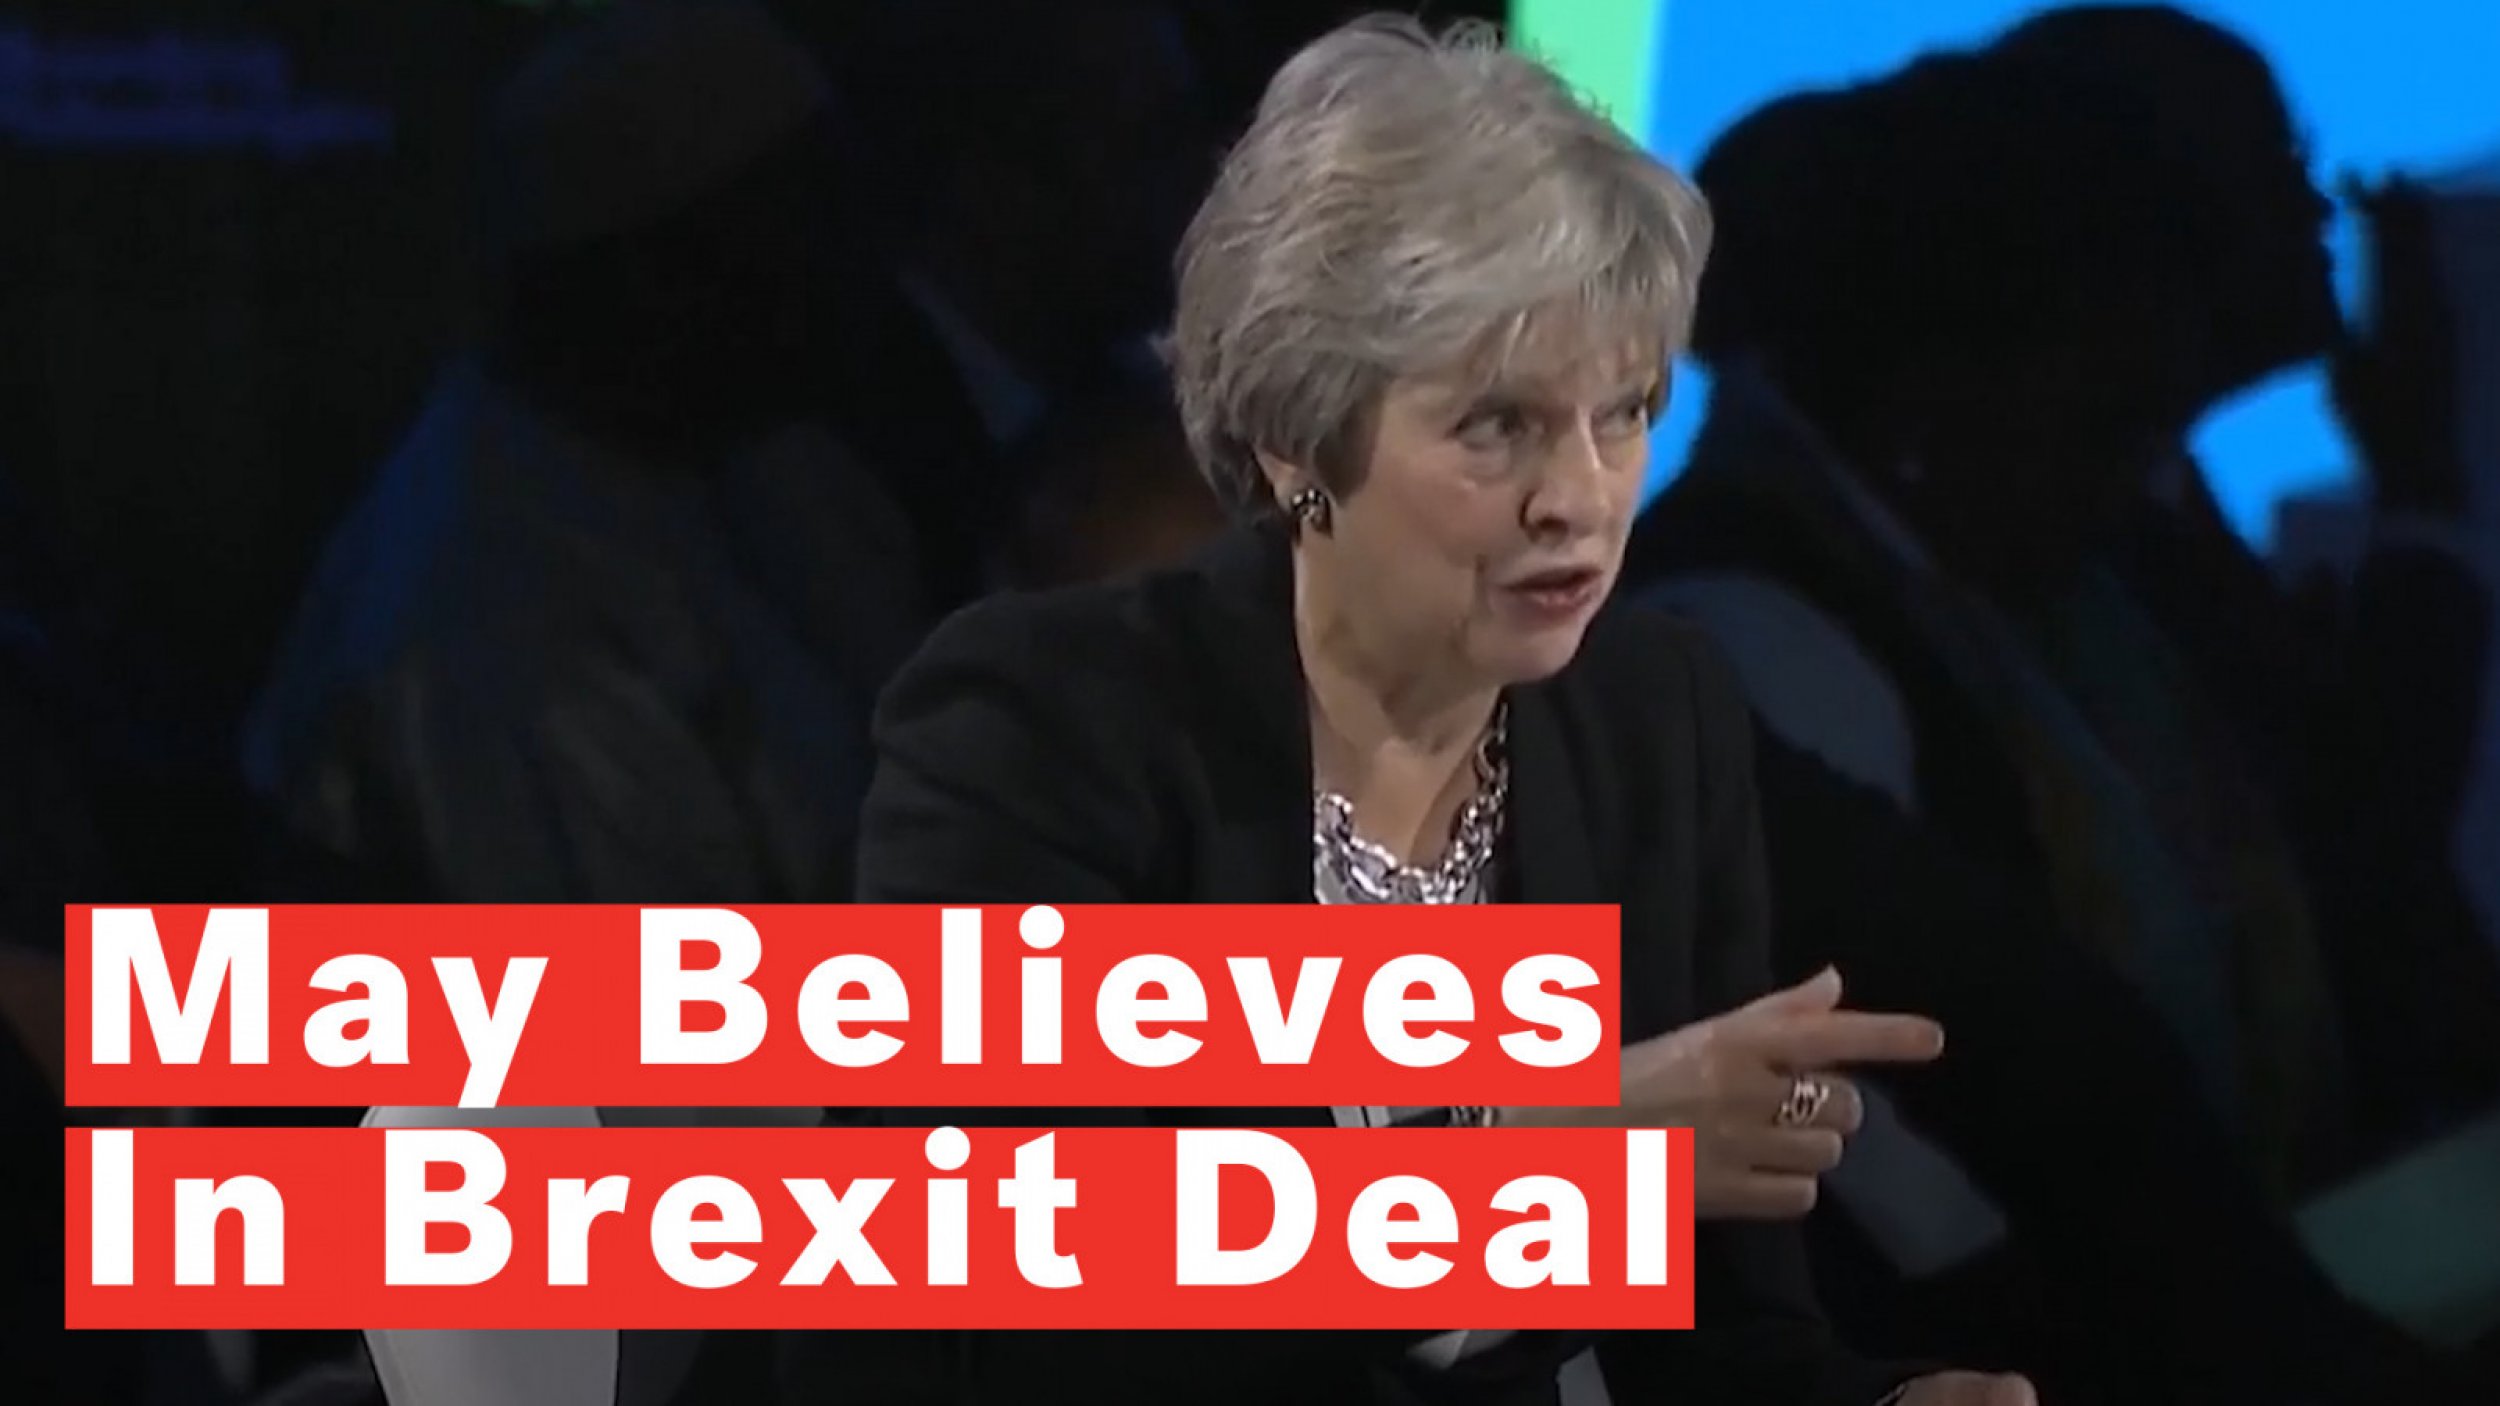 British Prime Minister Theresa May Says She Believes Brexit Deal With EU Will Happen